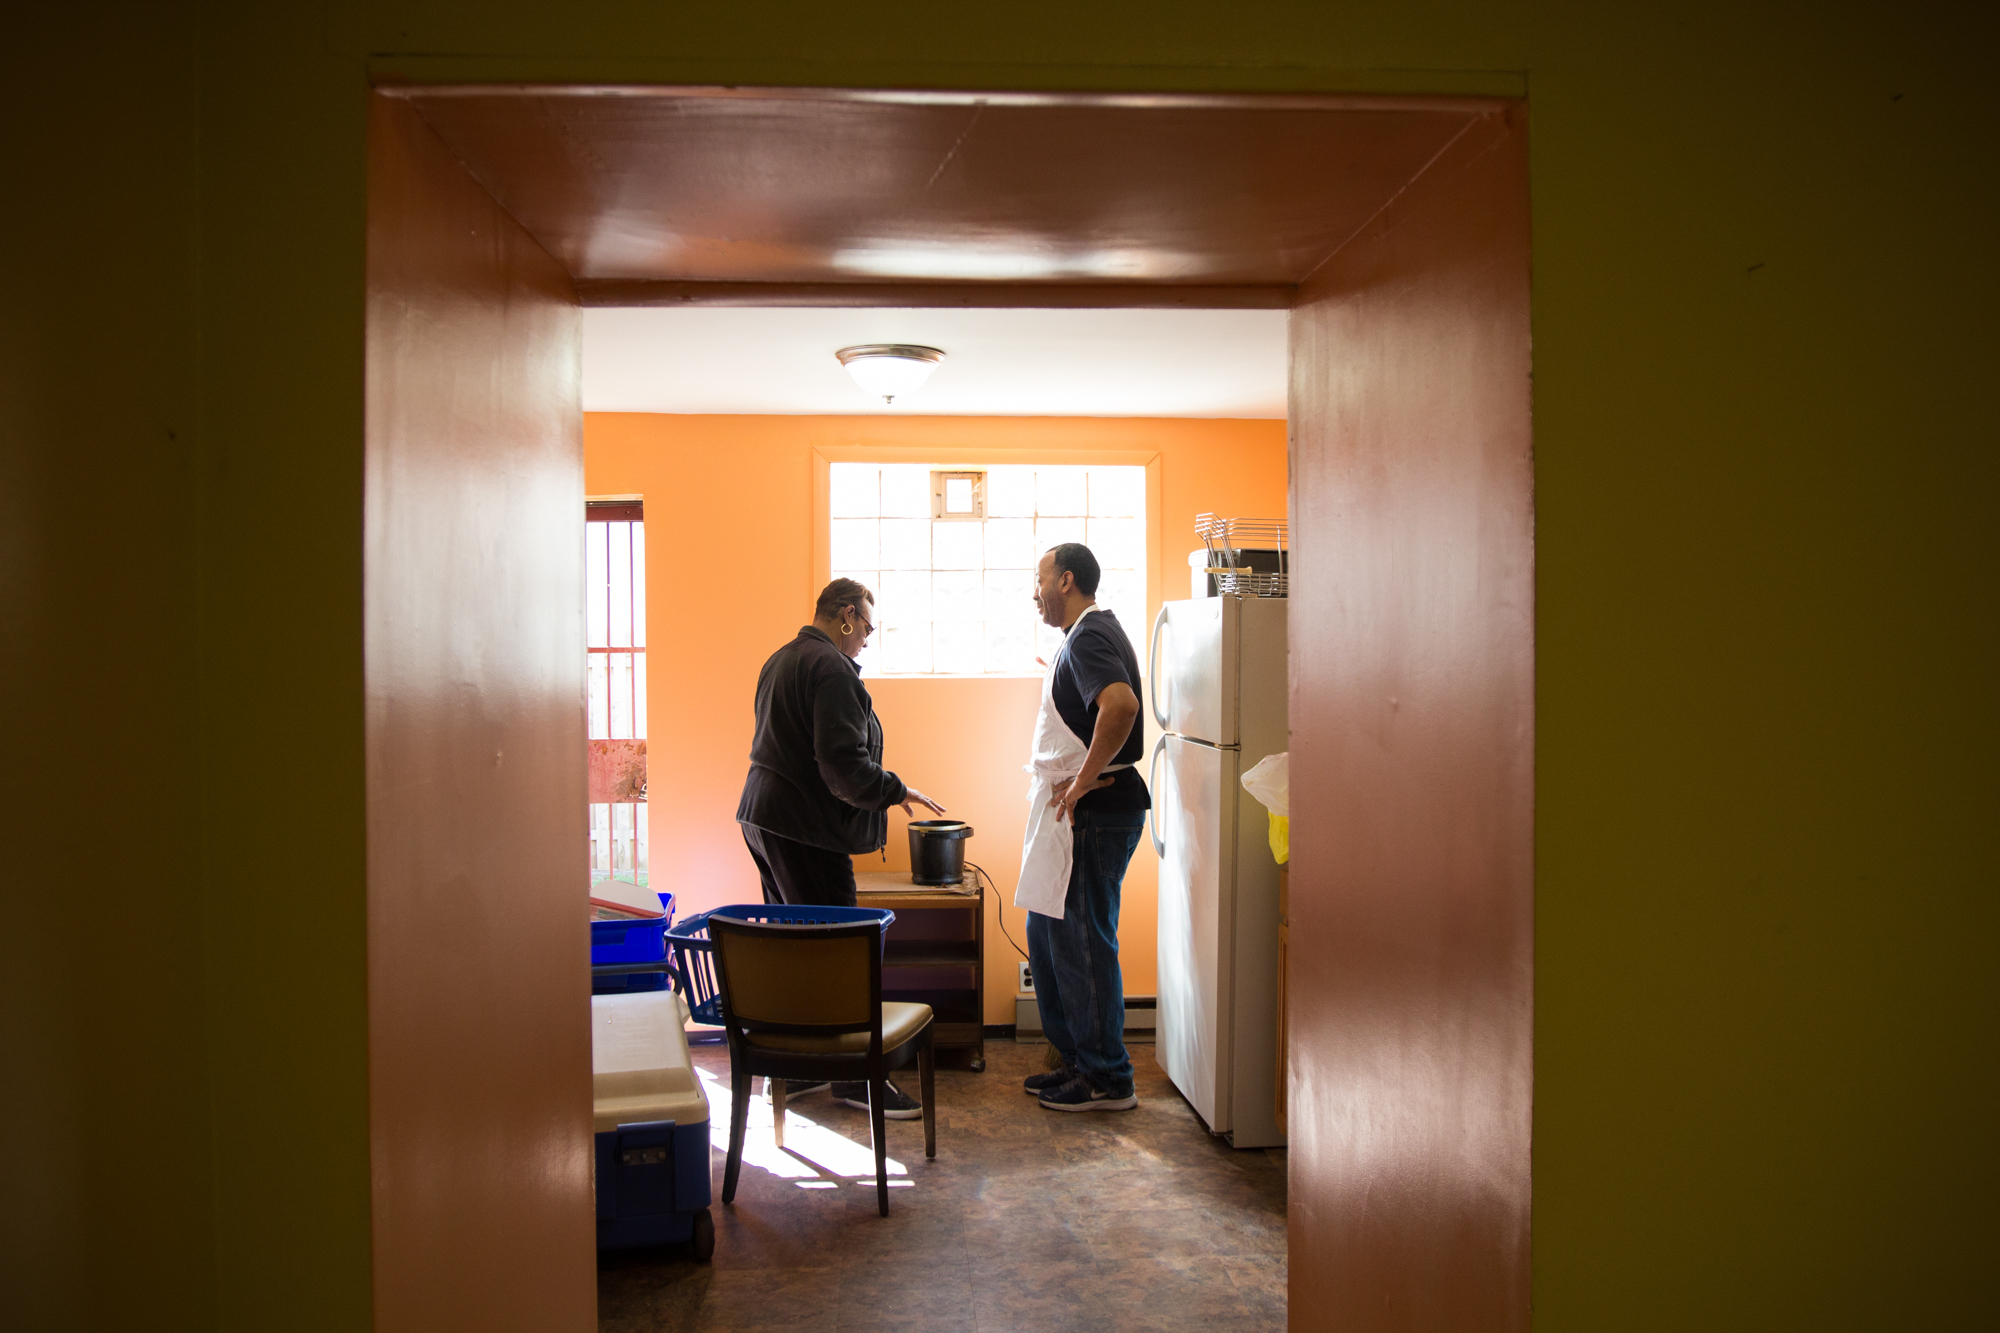  Helen Boggs and Michael Bell begin to prepare lunch during the third and final workshop of The Redline Project, held at the Neighbors in Action Association house in Point Breeze March 12, 2016.&nbsp; 